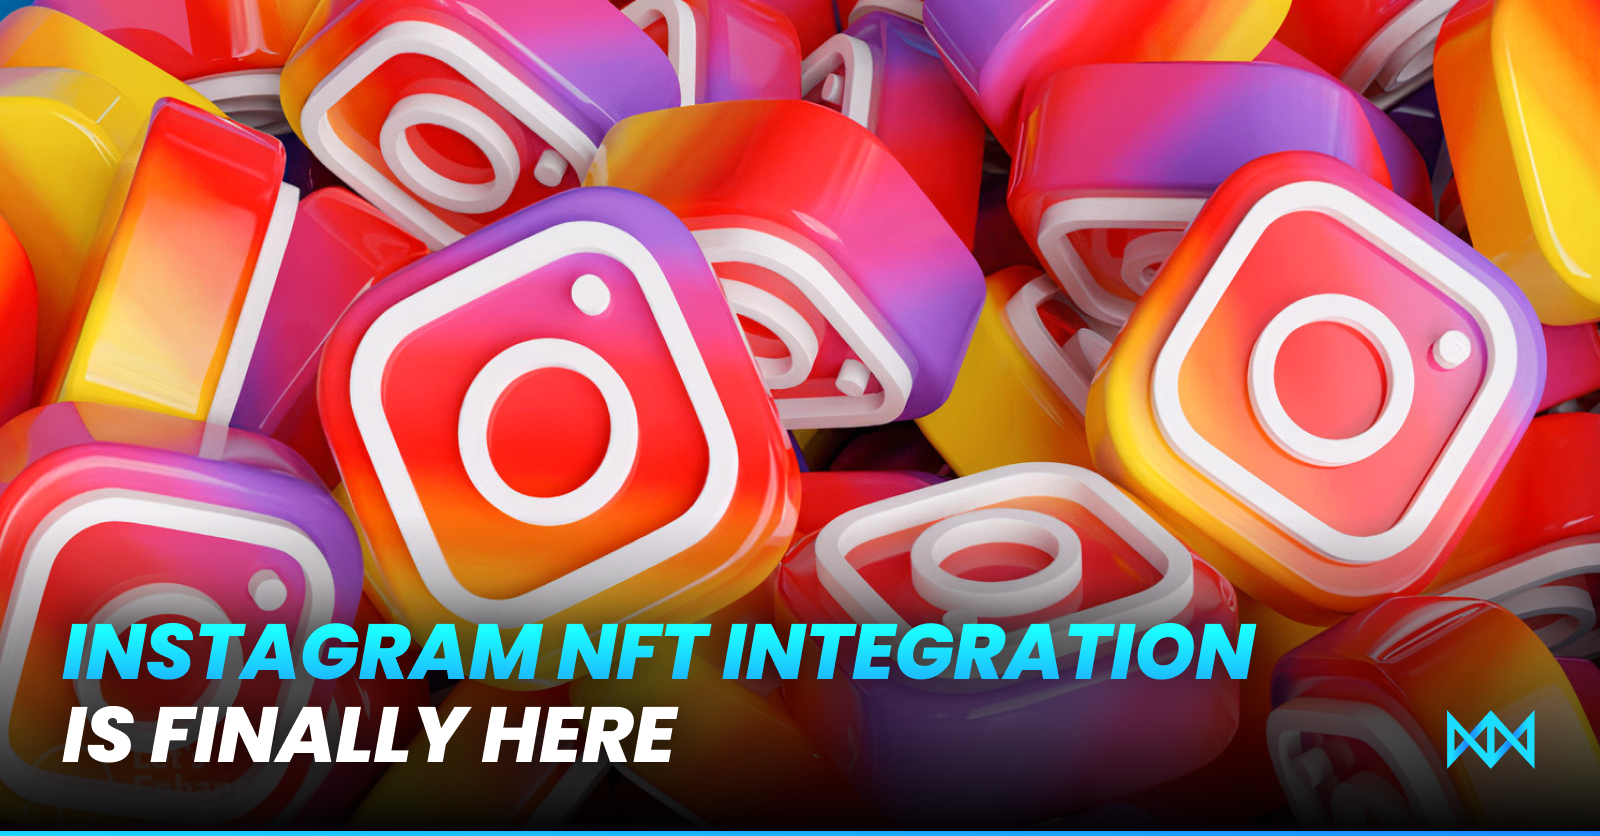 Meta rolls out Instagram NFT integration across 100 countries